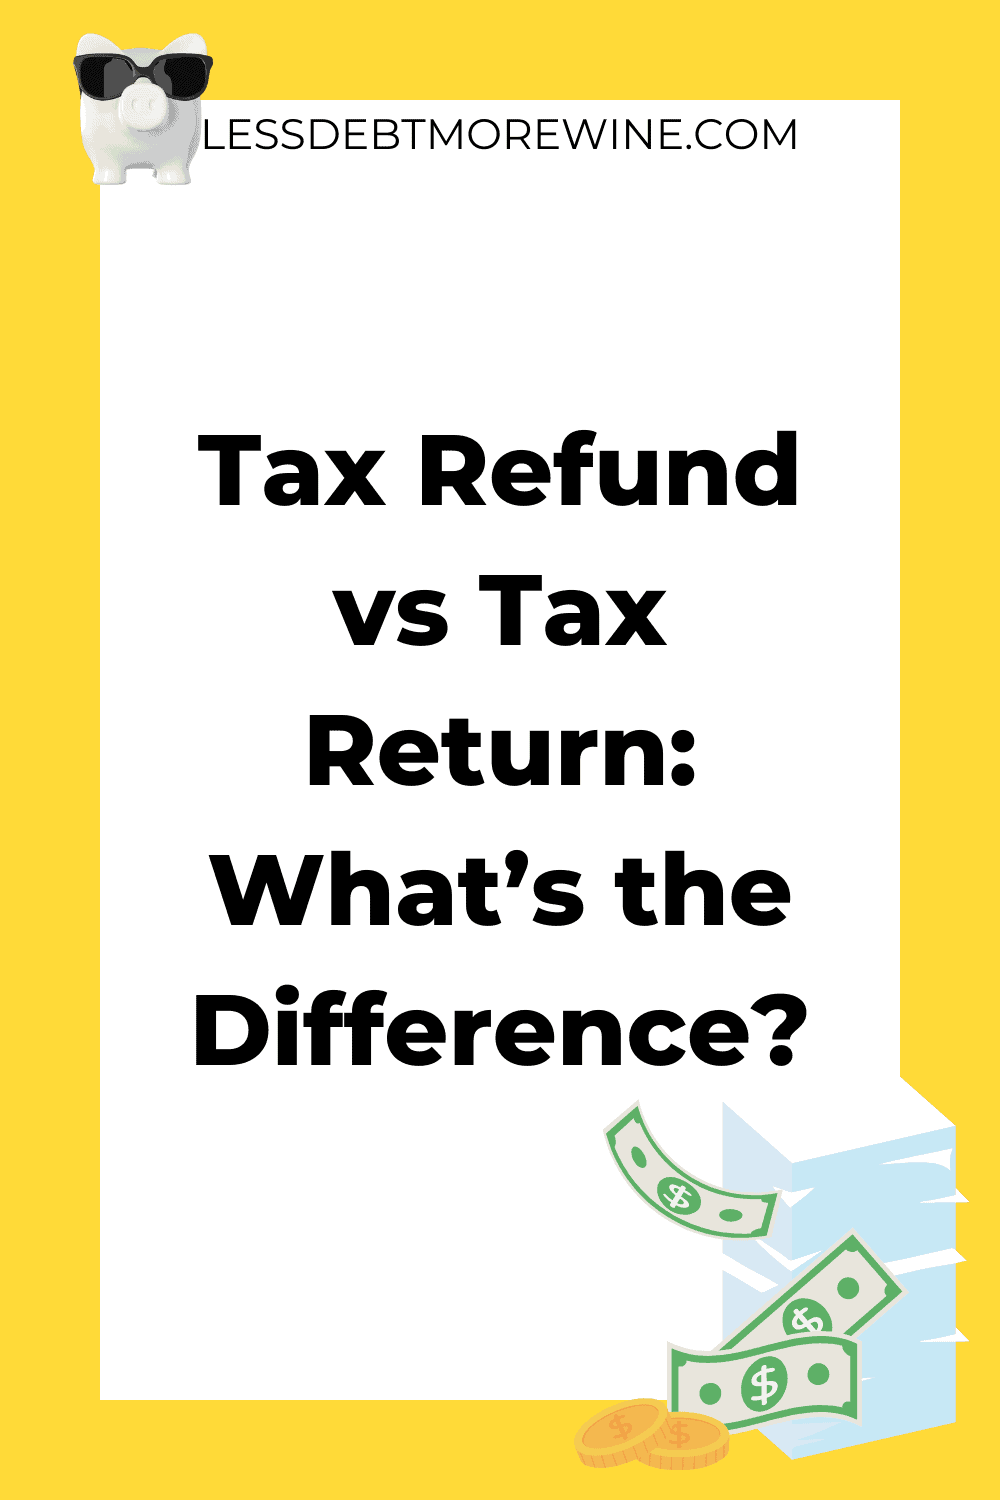 tax-refund-vs-tax-return-what-s-the-difference-less-debt-more-wine